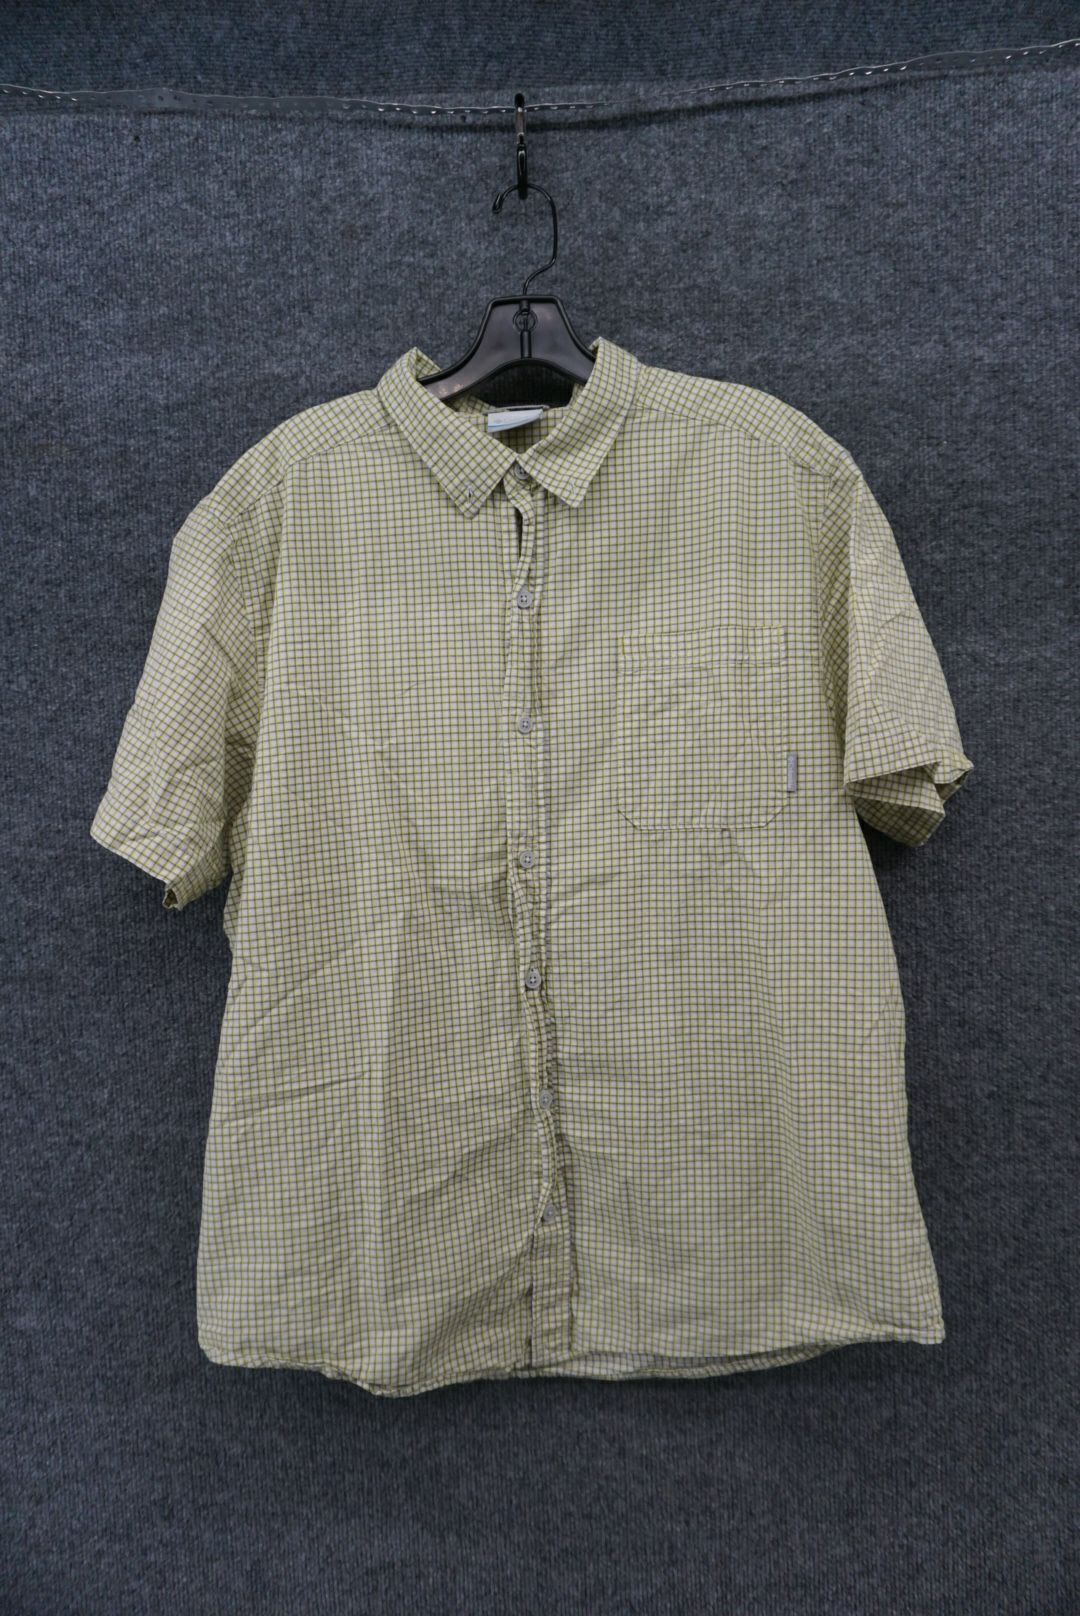 Columbia Size Large Men's S/S Button Up